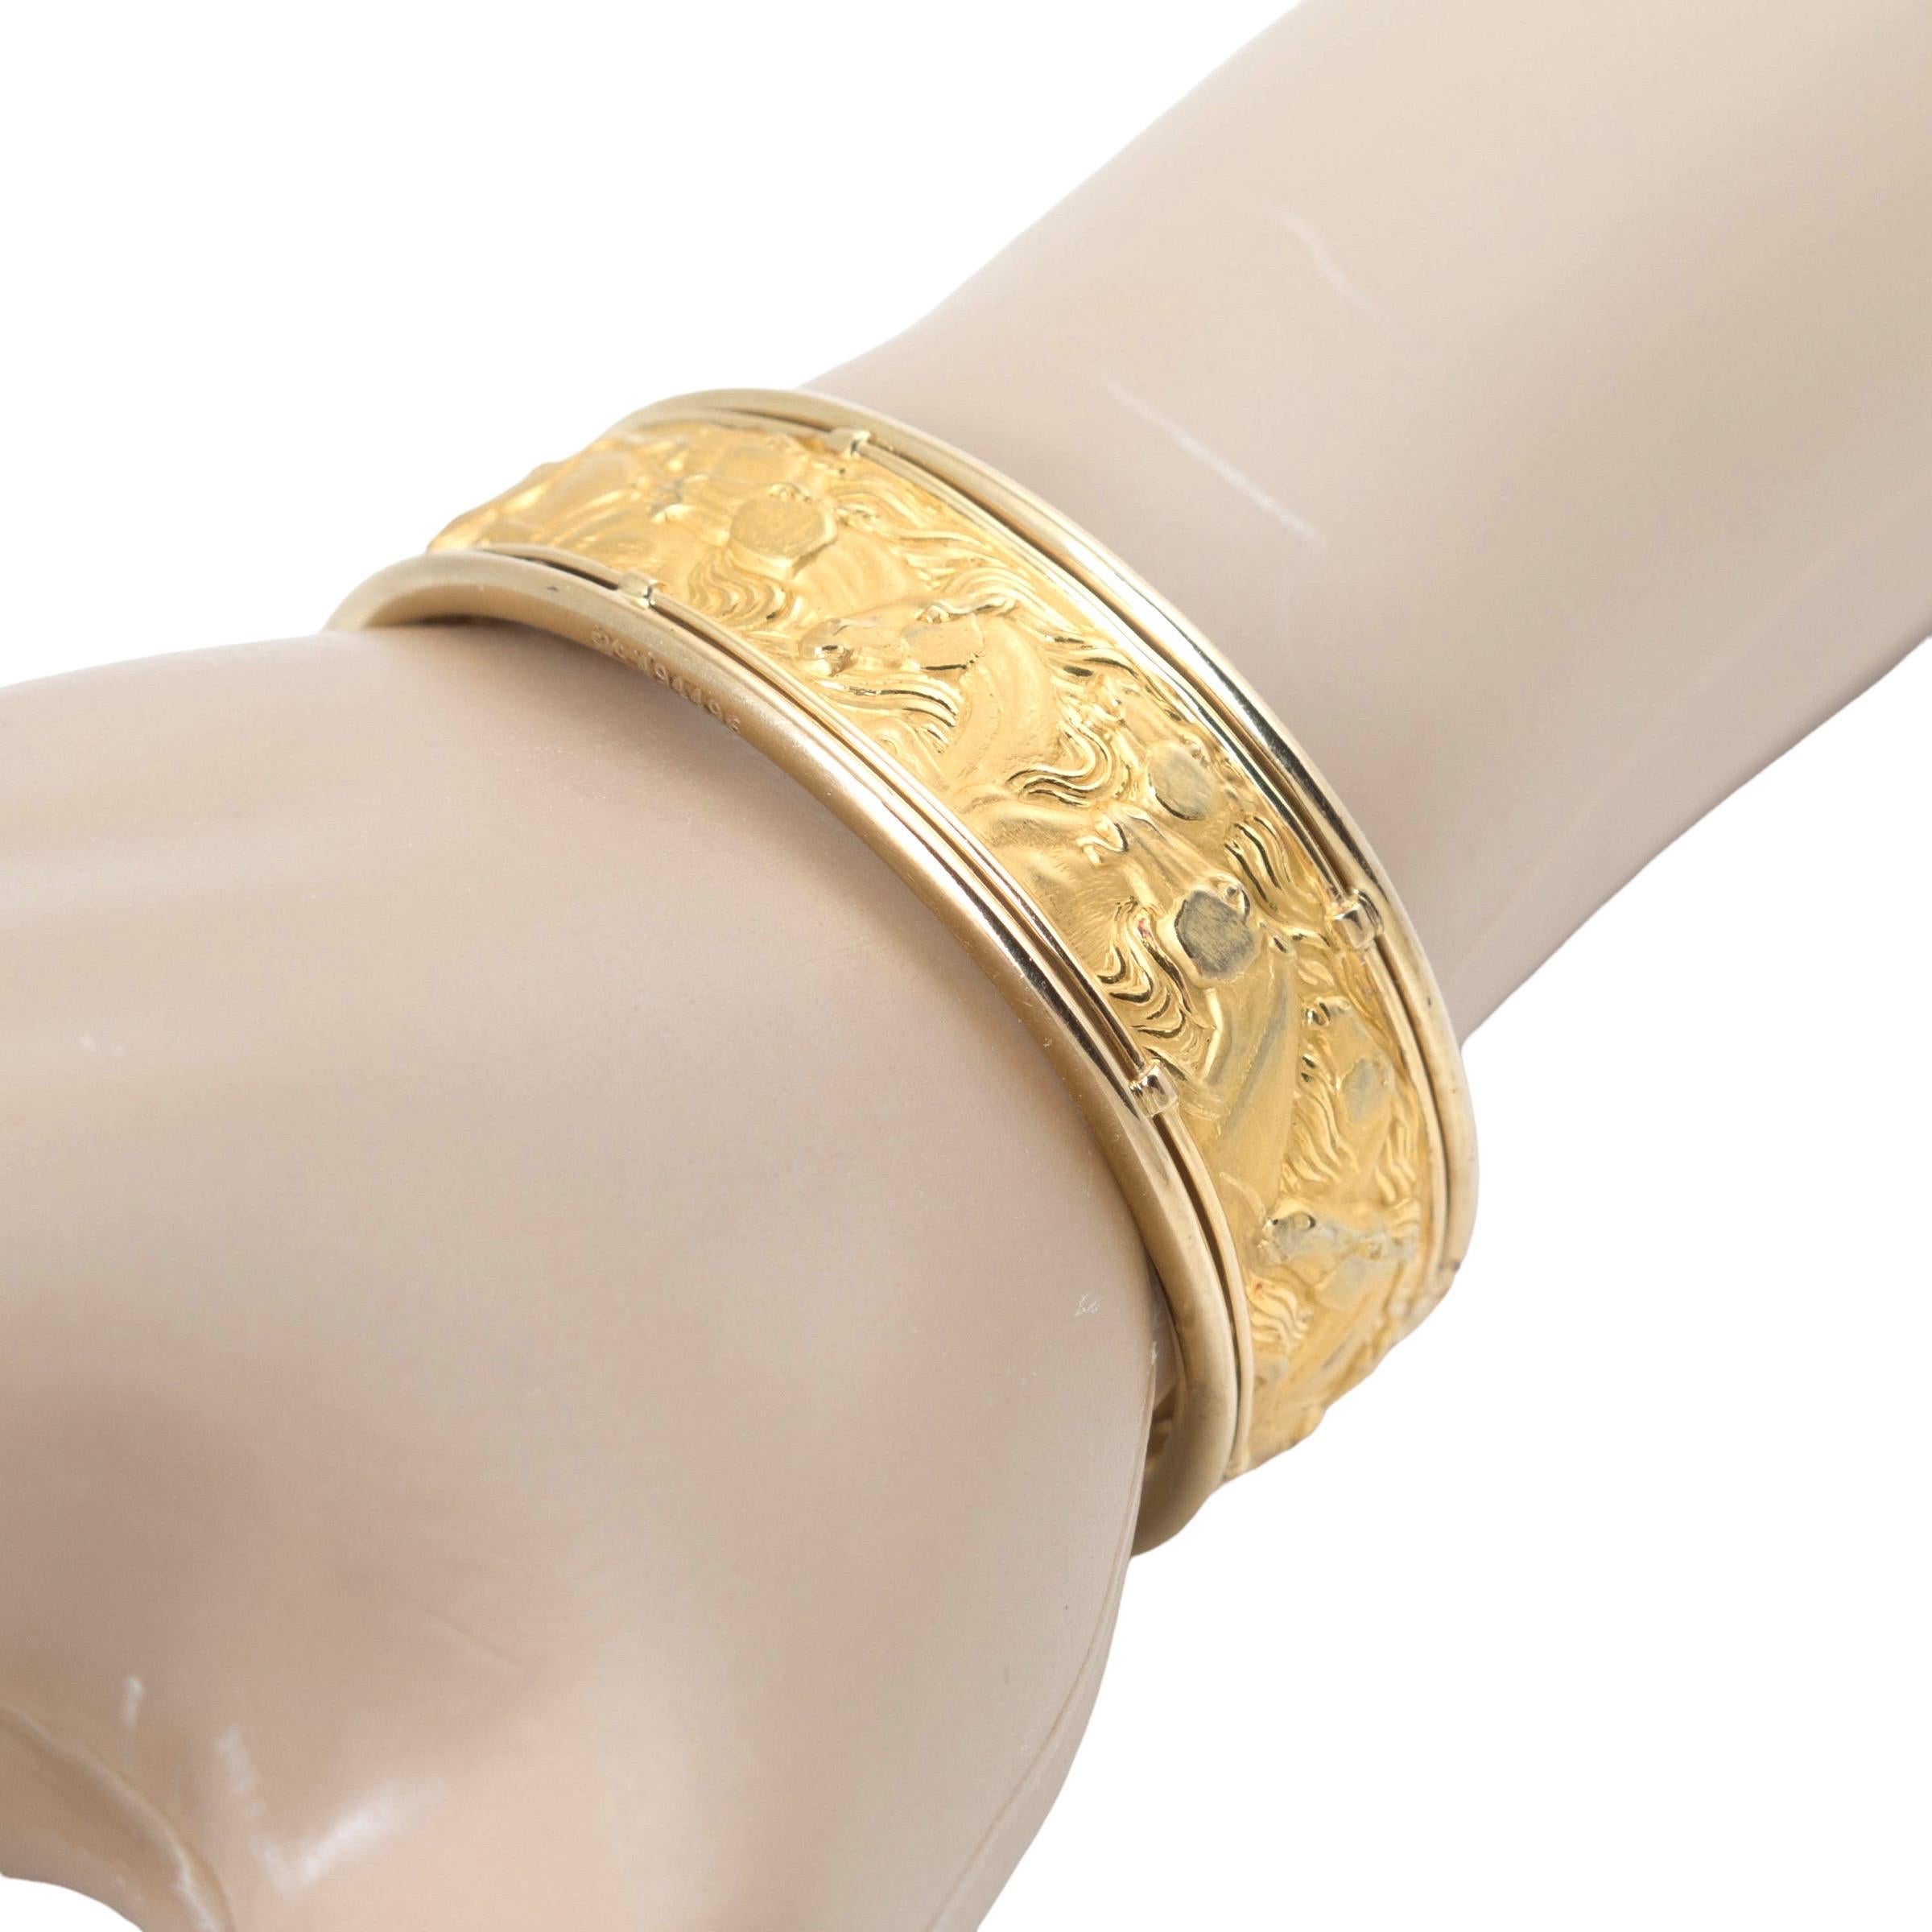 Carrera y Carrera 18k Yellow Gold Equestrian Horses Cuff Bracelet In Good Condition For Sale In Austin, TX